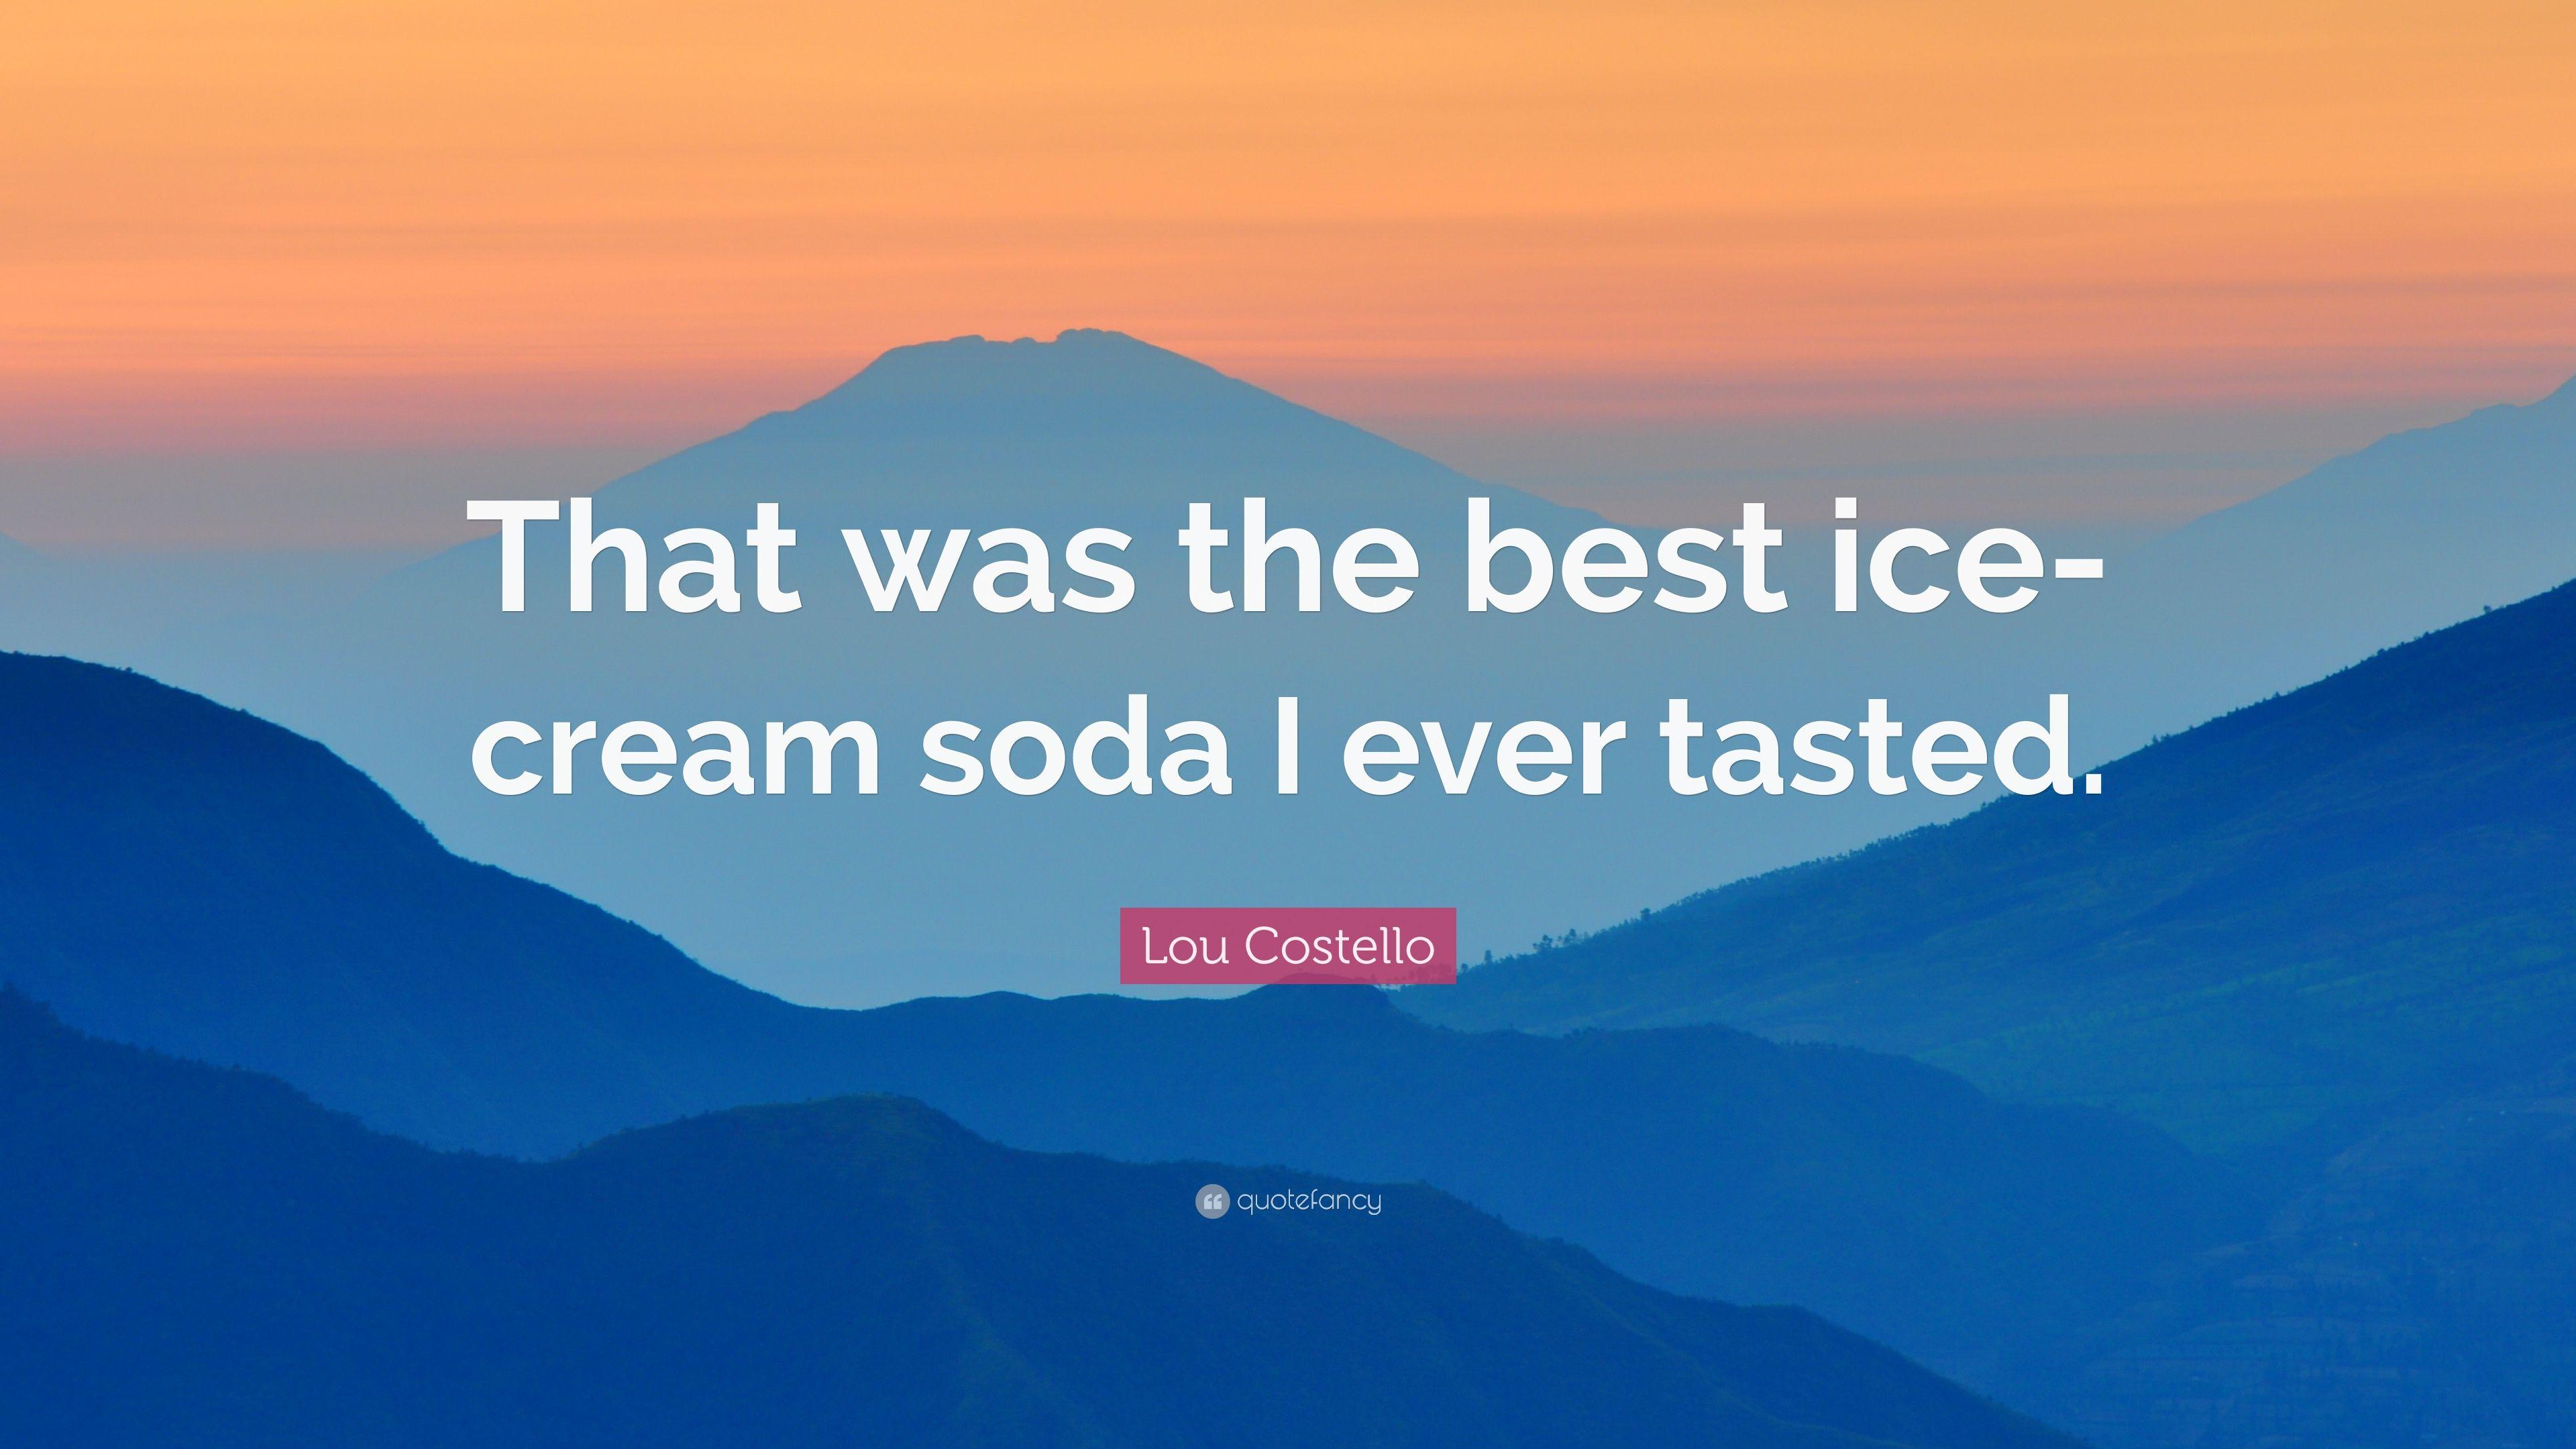 Lou Costello Quote: “That Was The Best Ice Cream Soda I Ever Tasted